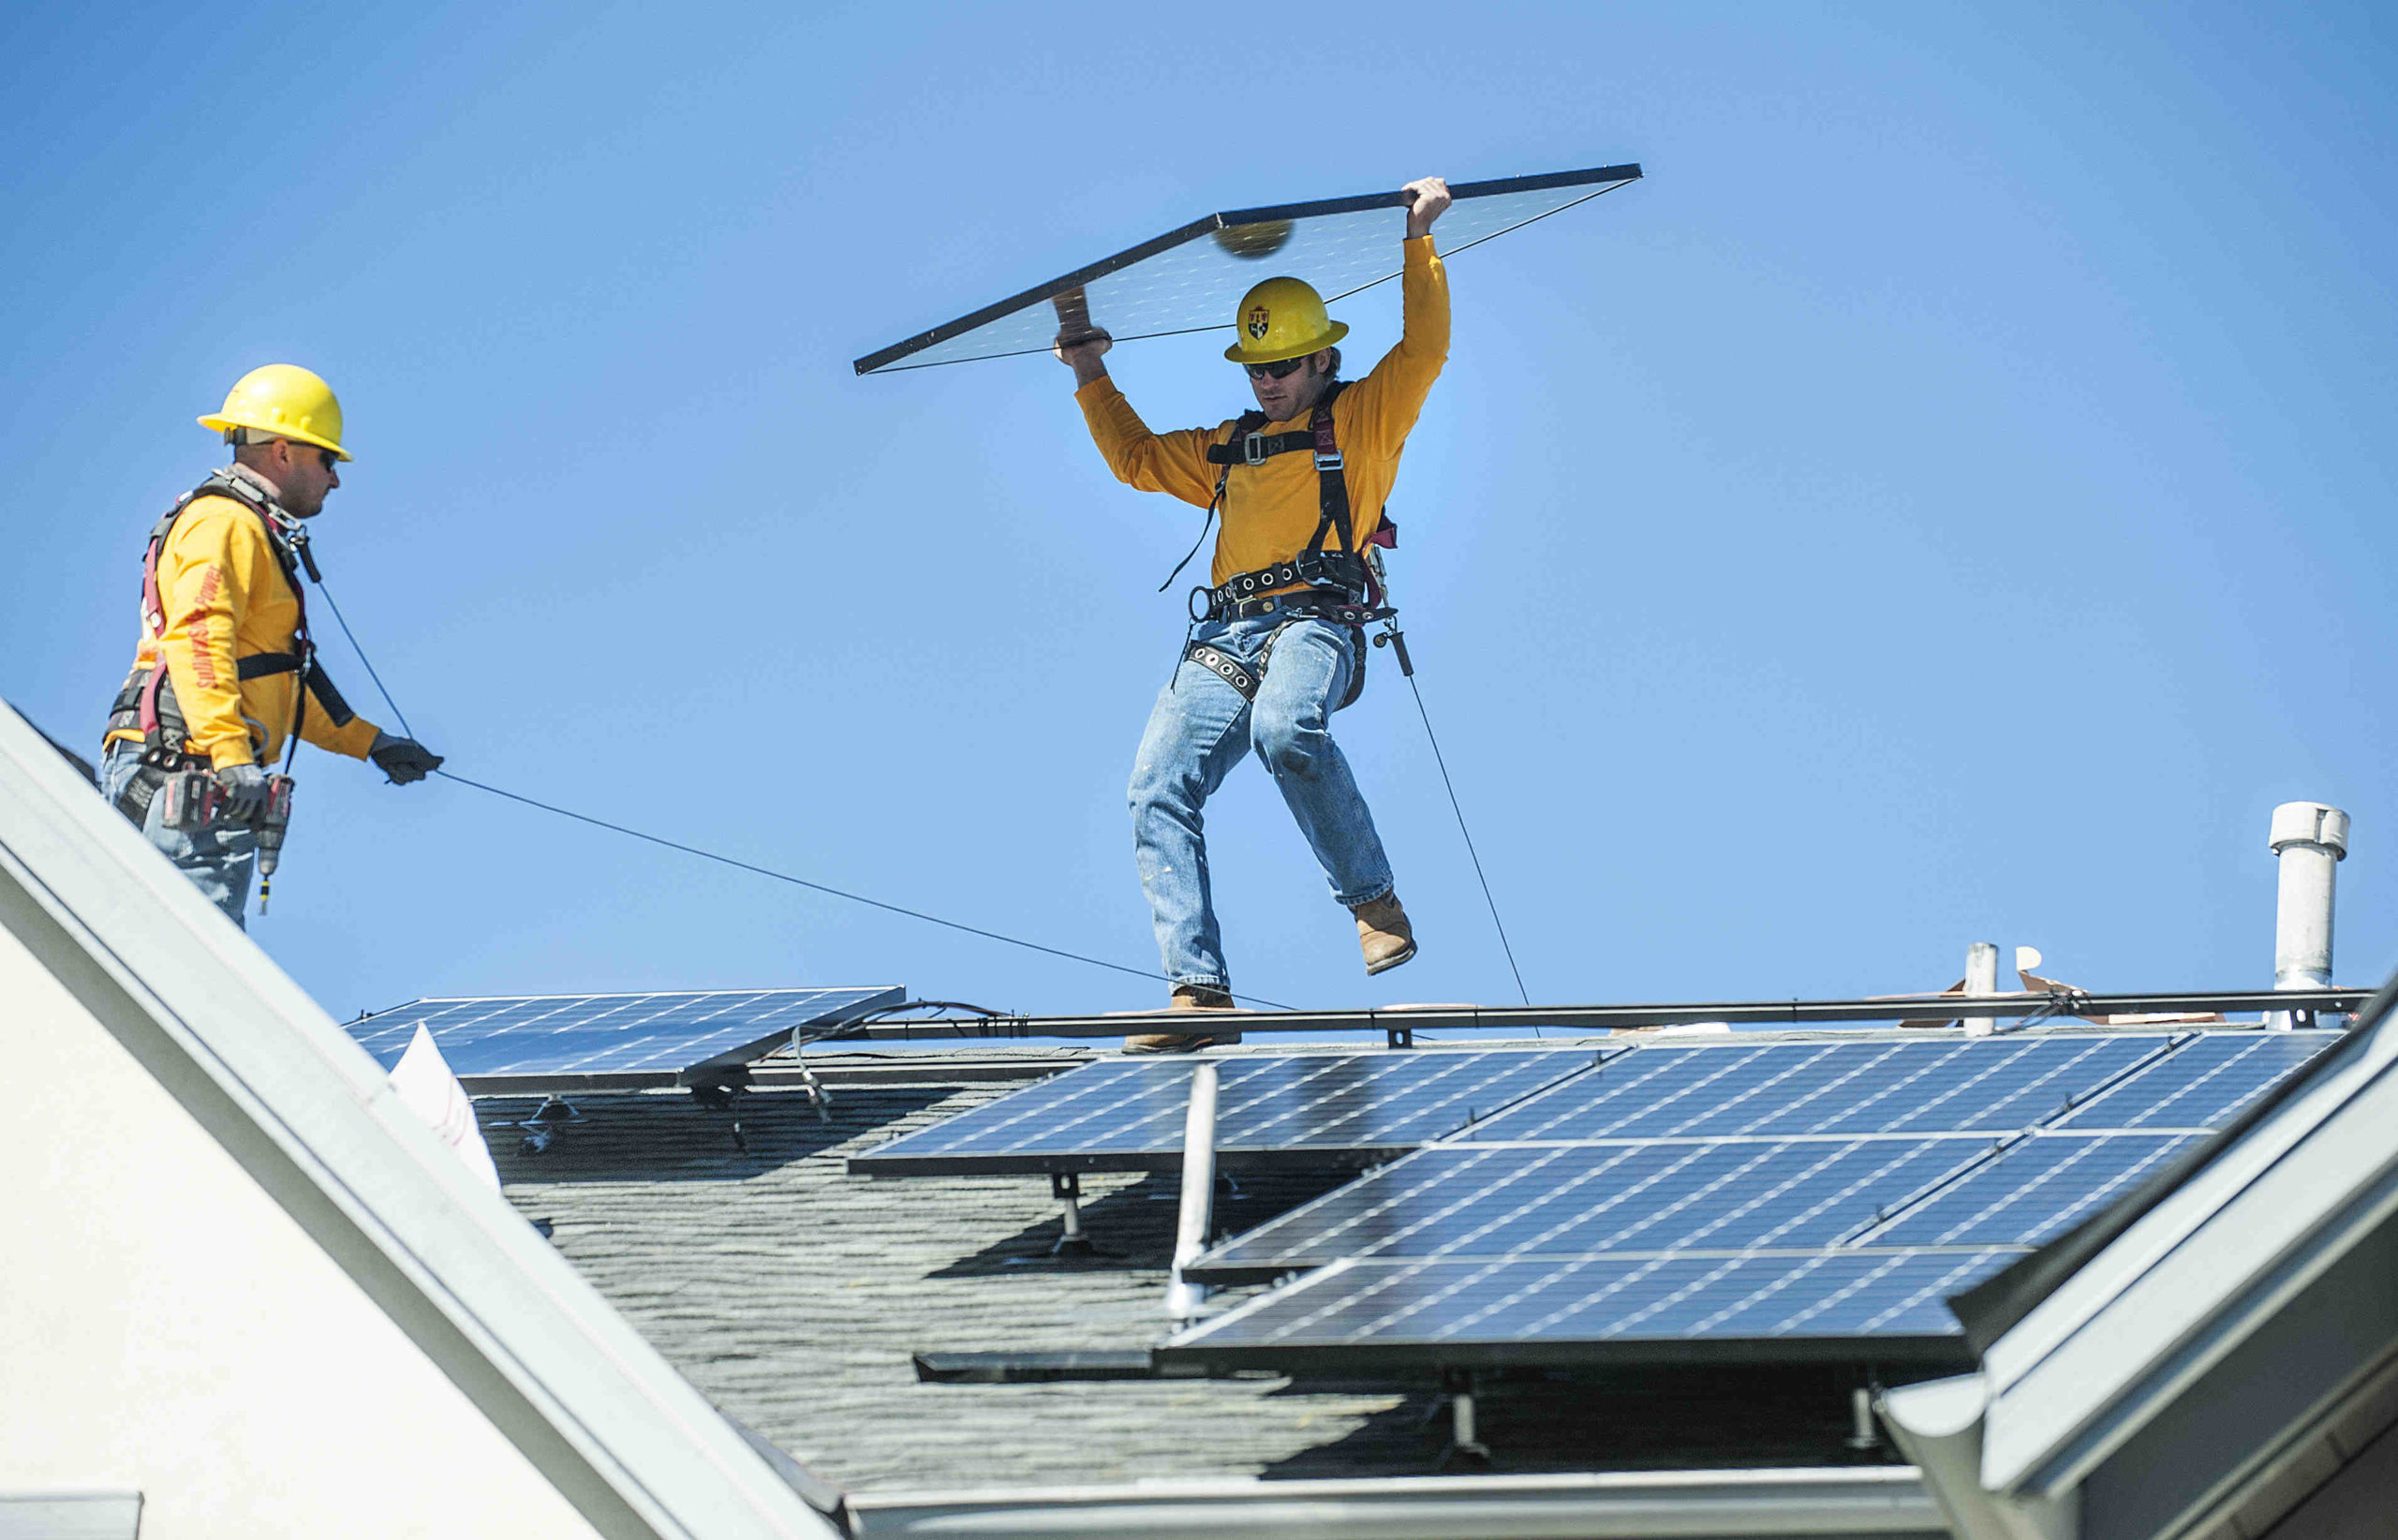 Is it cheaper to build or buy solar panels?